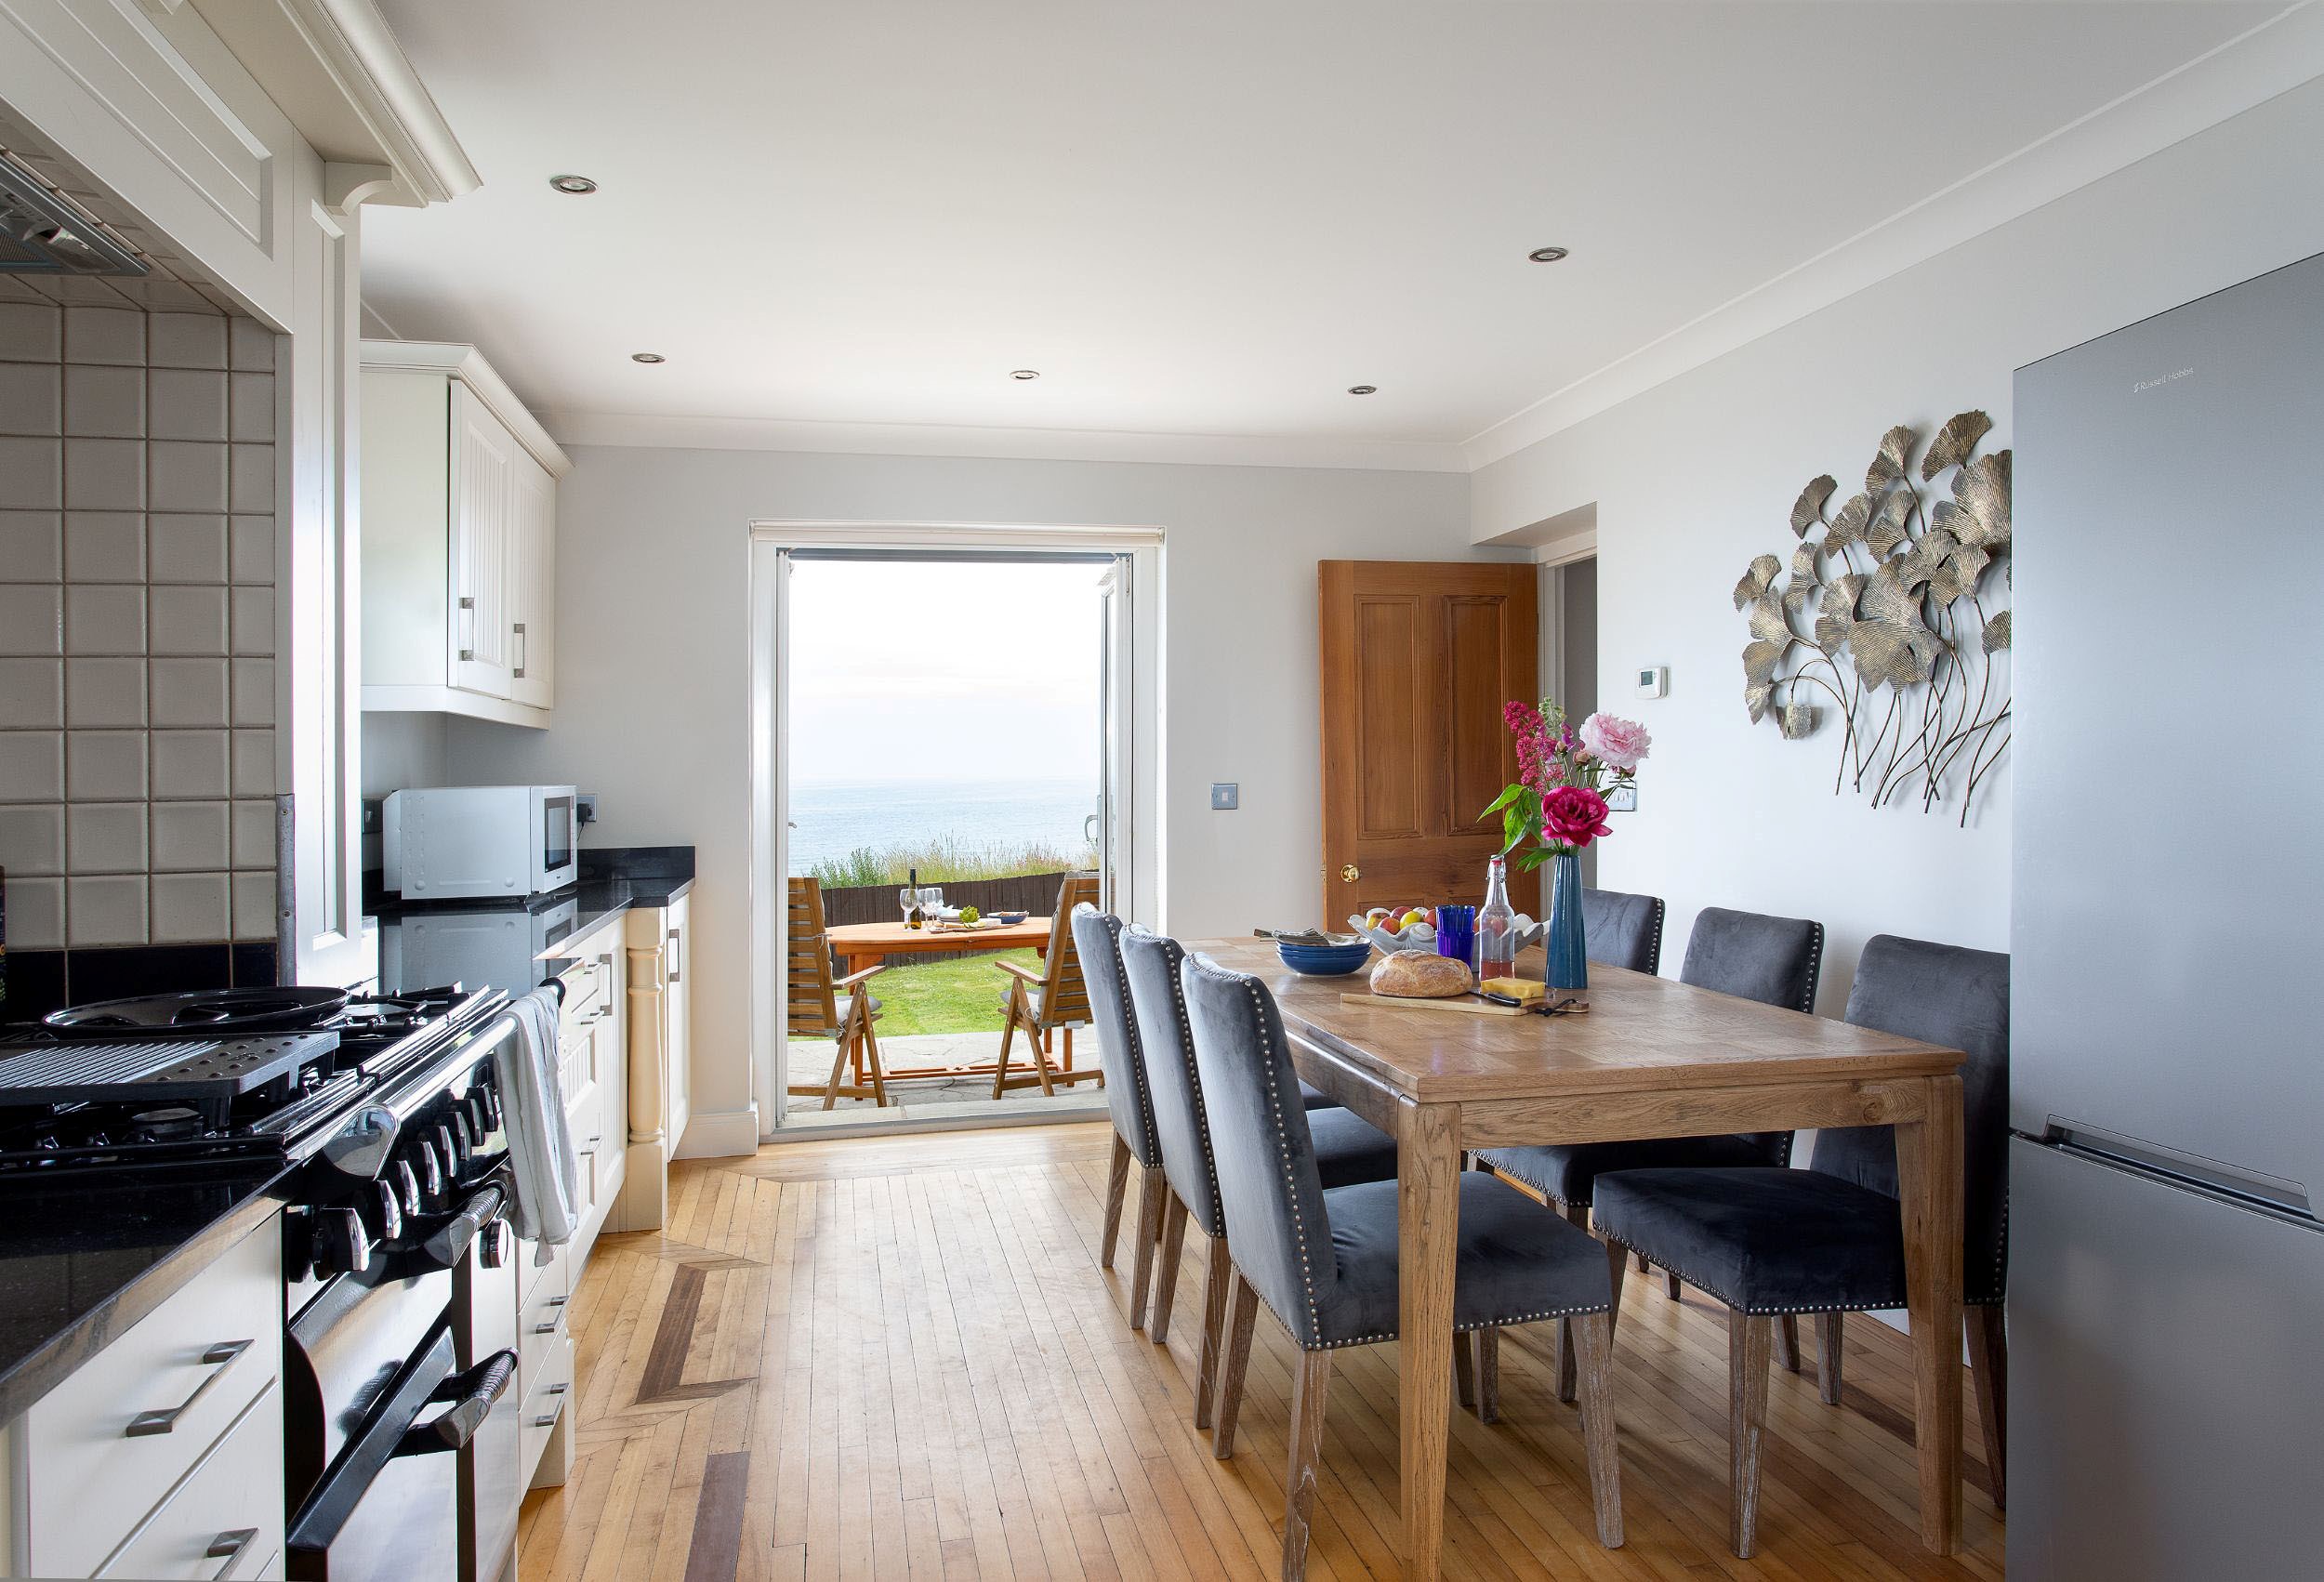 Sea Breeze - kitchen and dining table with French doors beyond opening out onto the garden